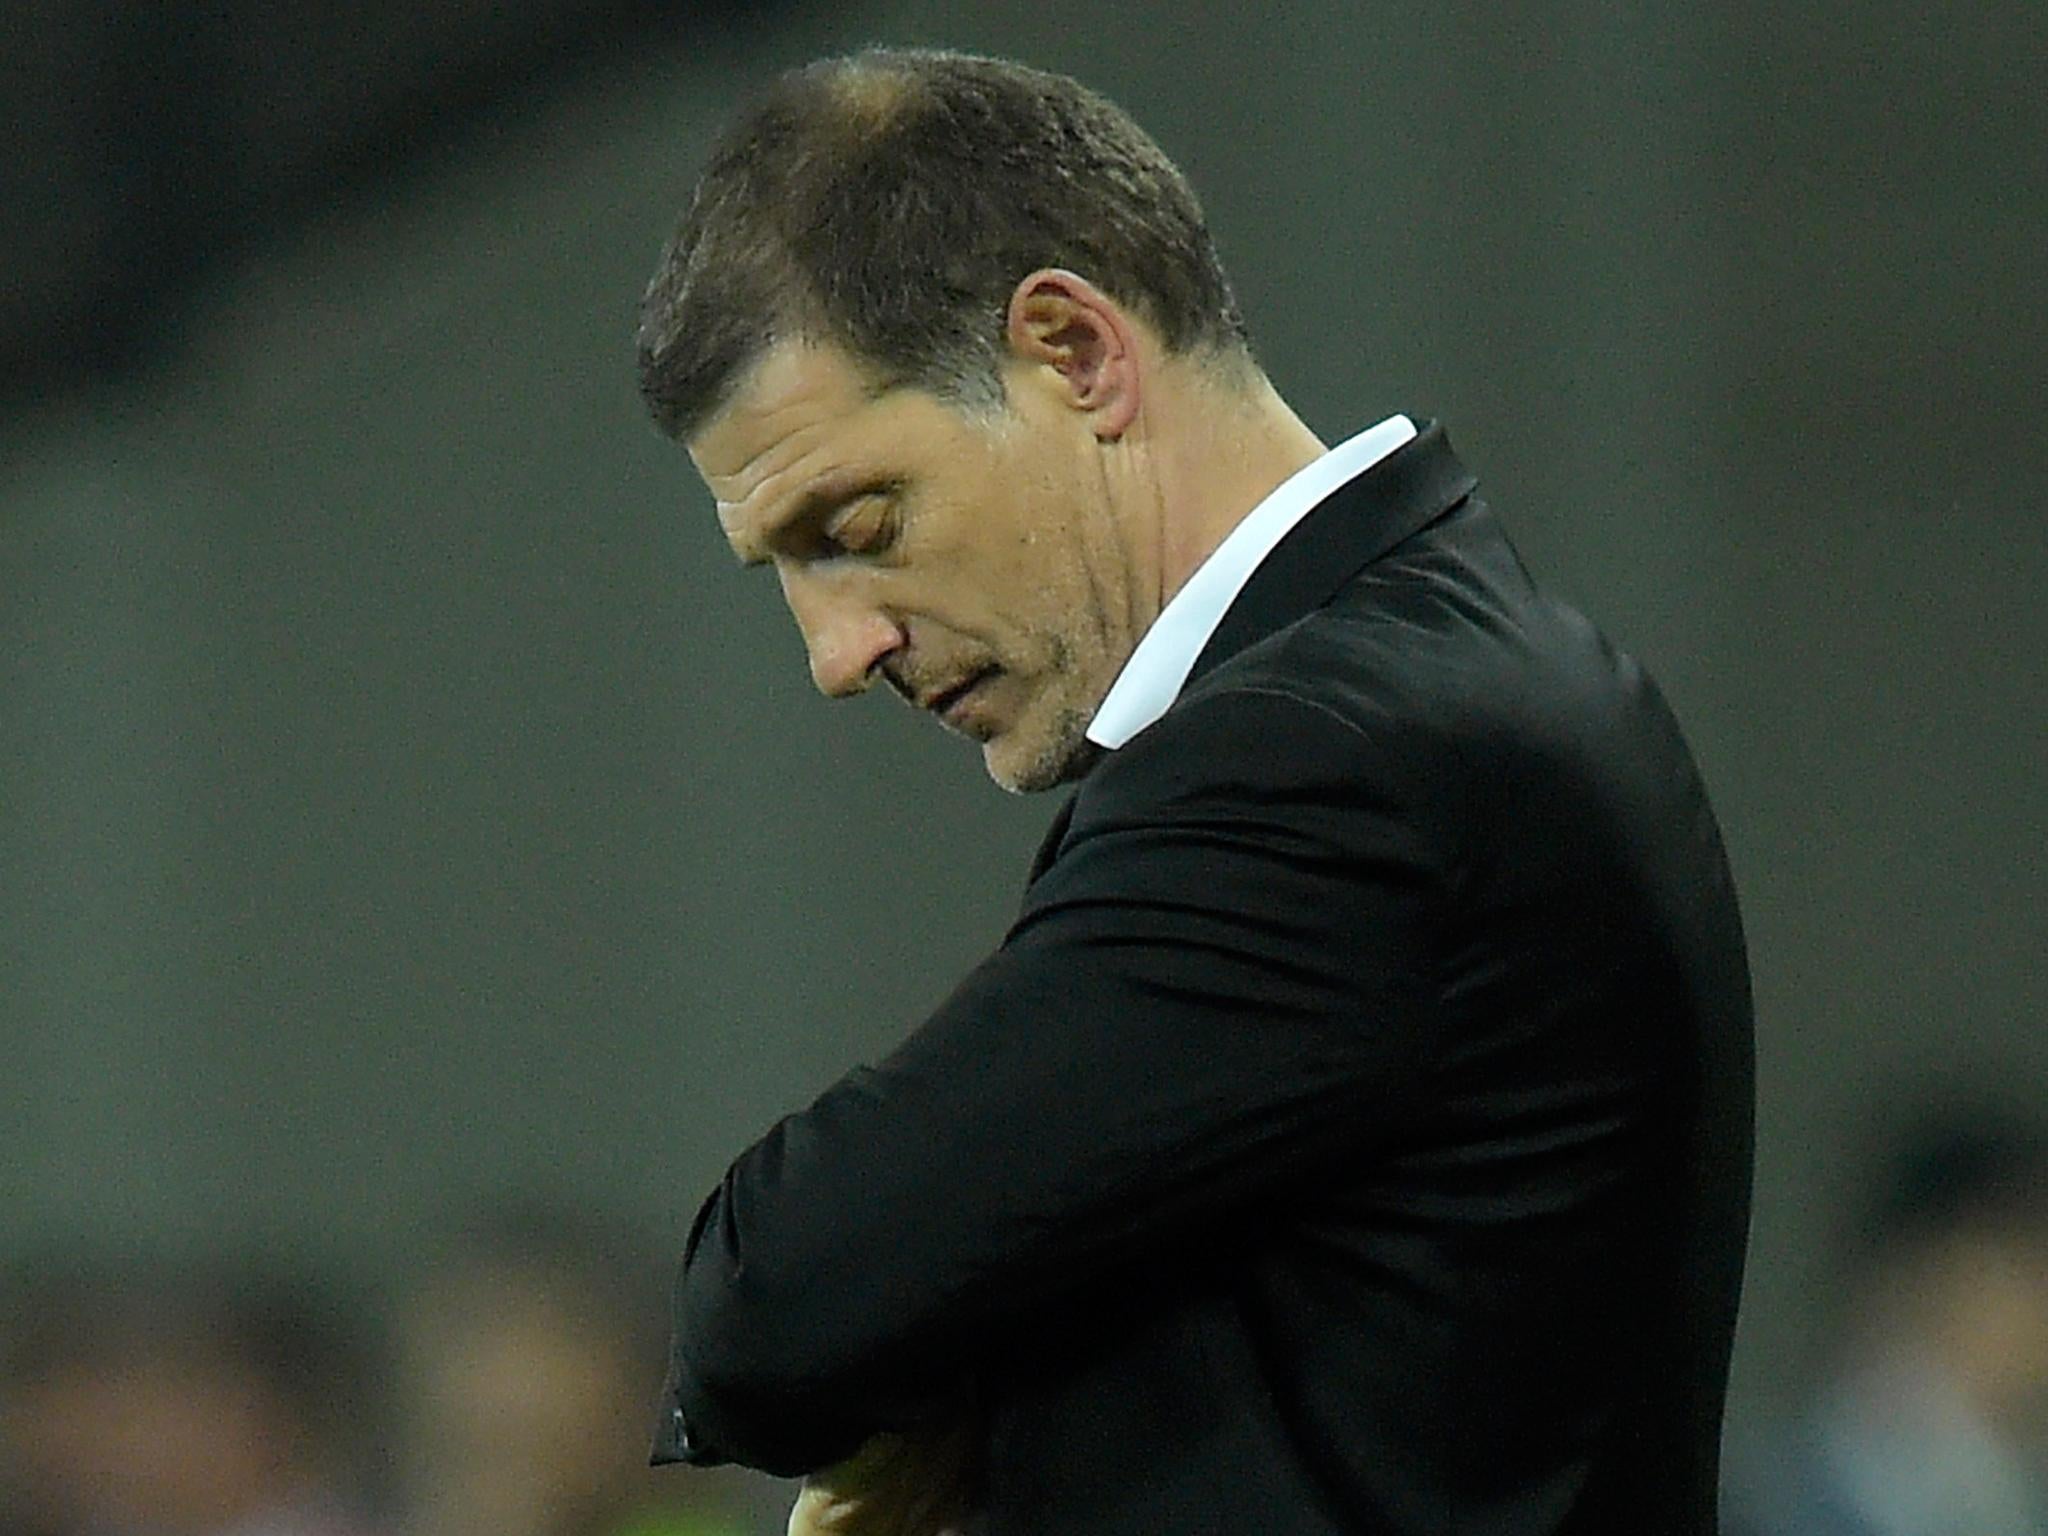 Slaven Bilic has been sacked by West Ham United